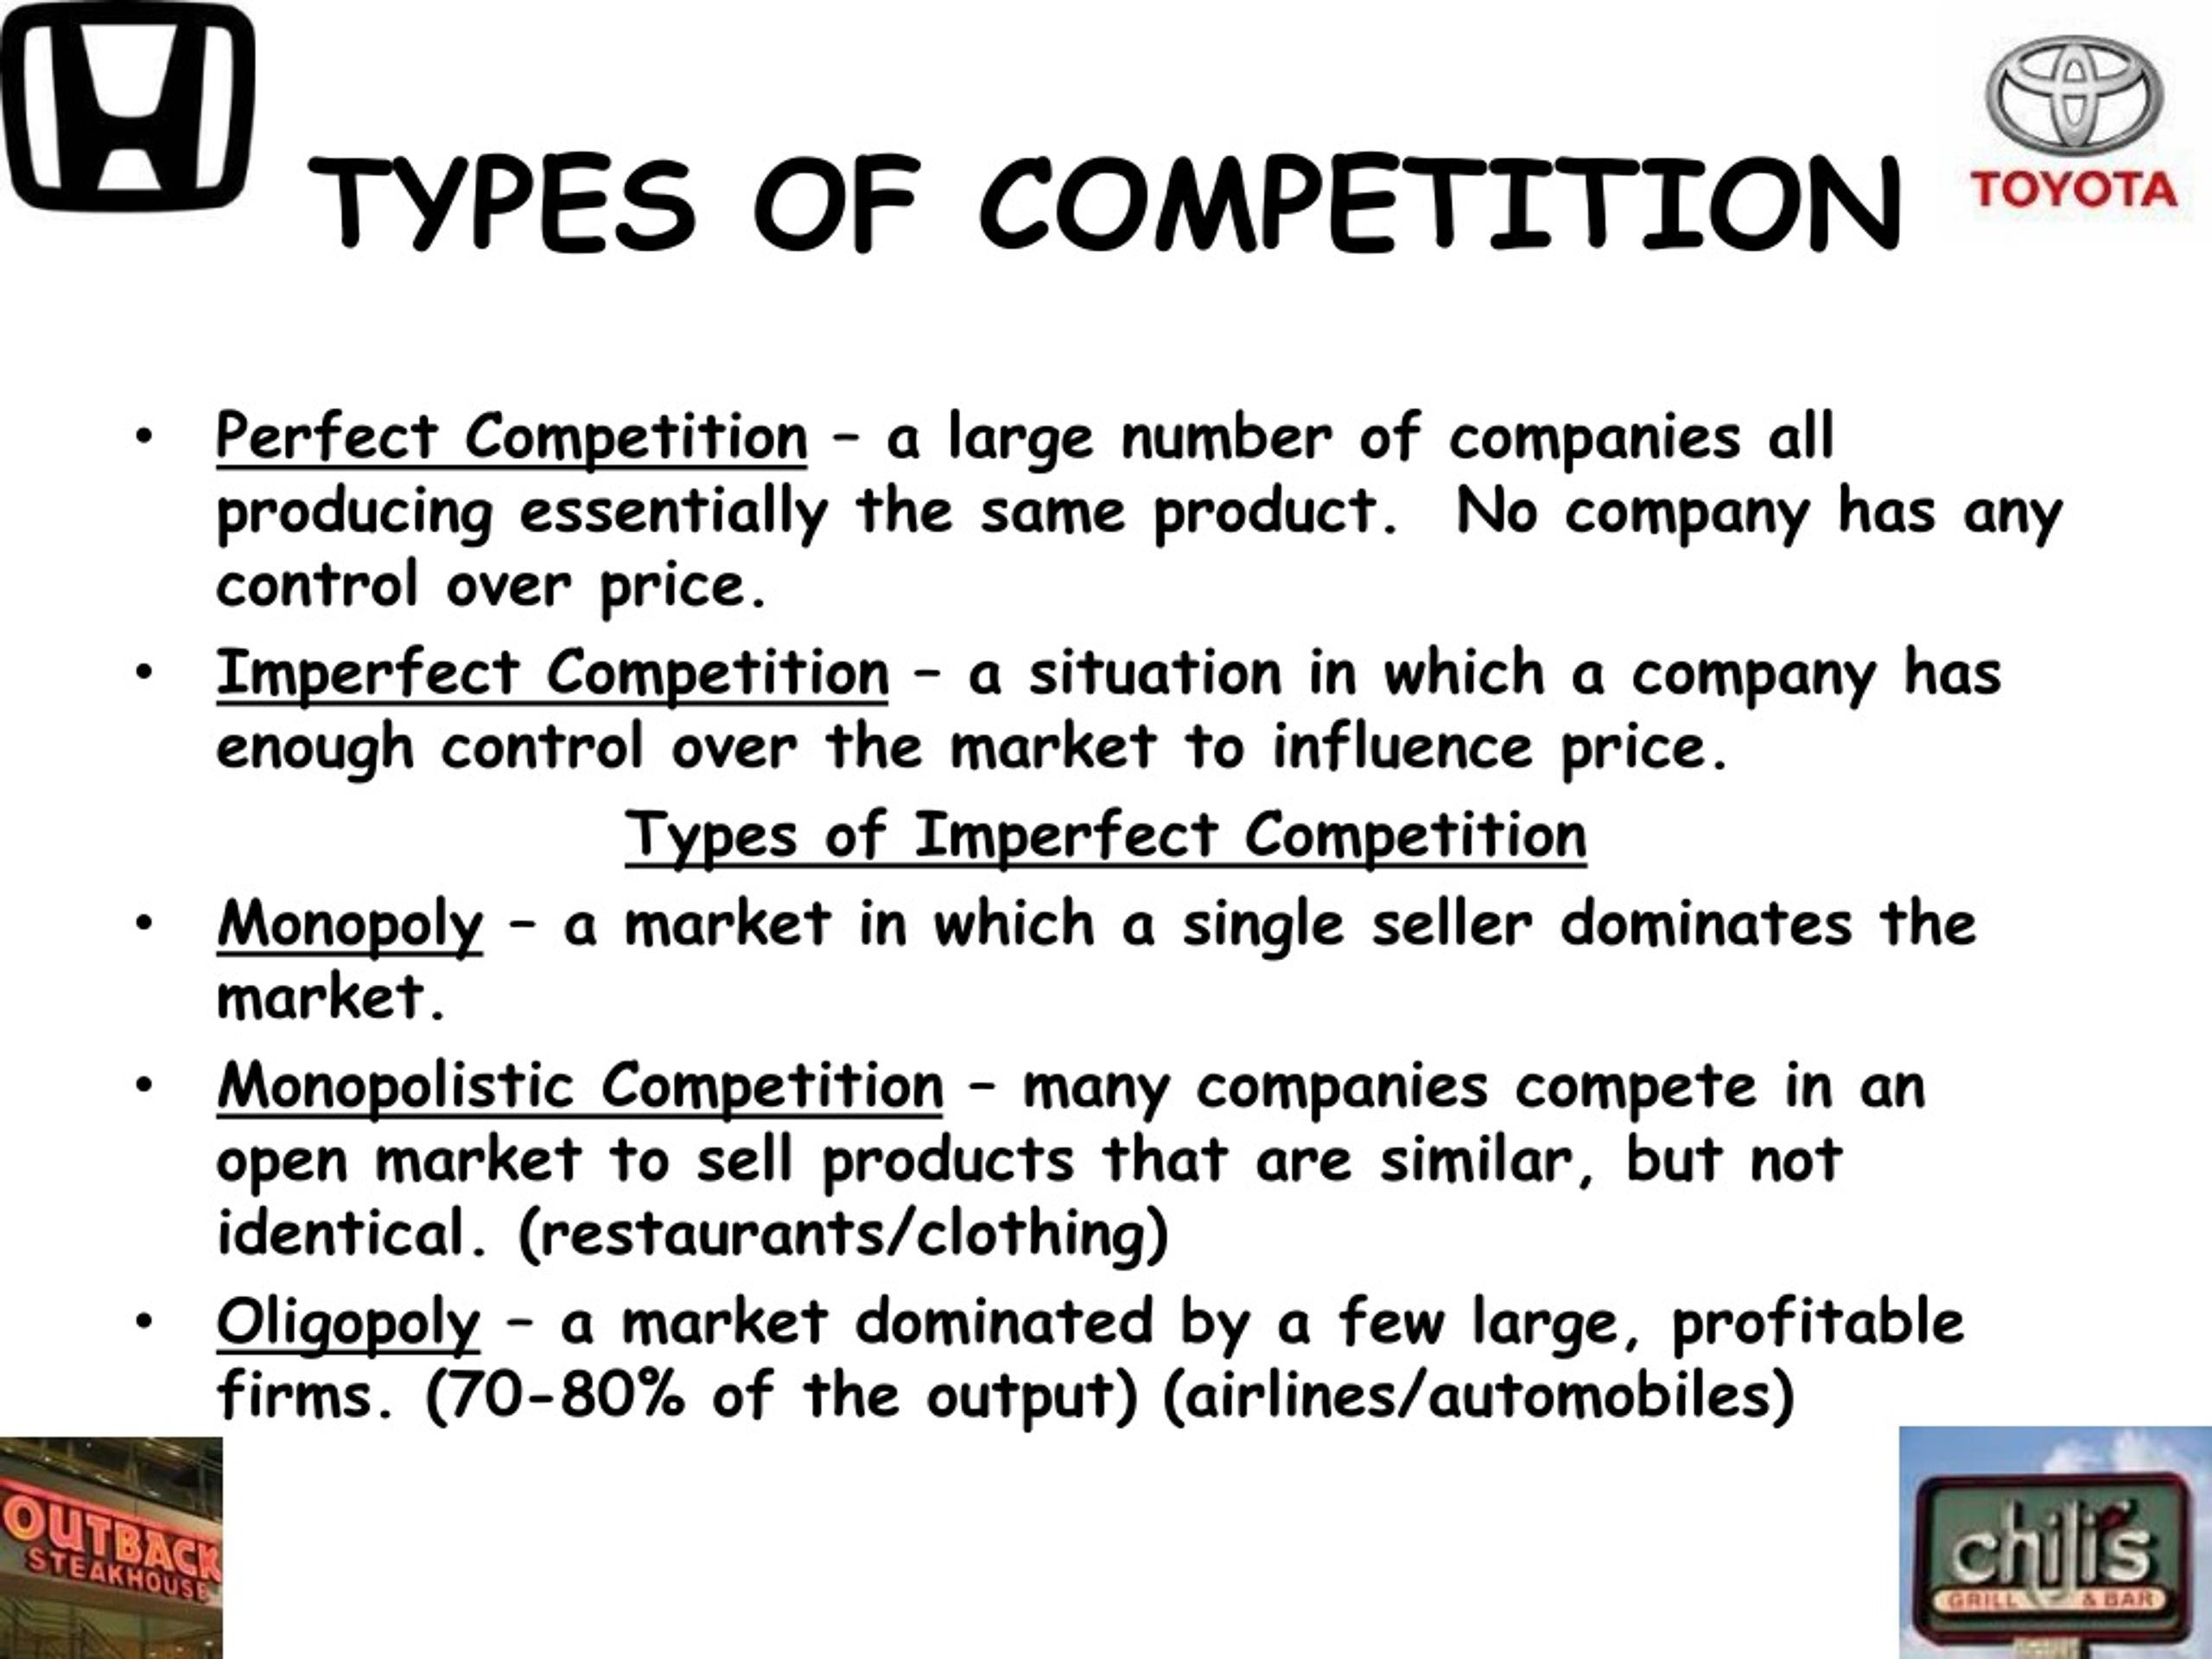 Kinds of competition